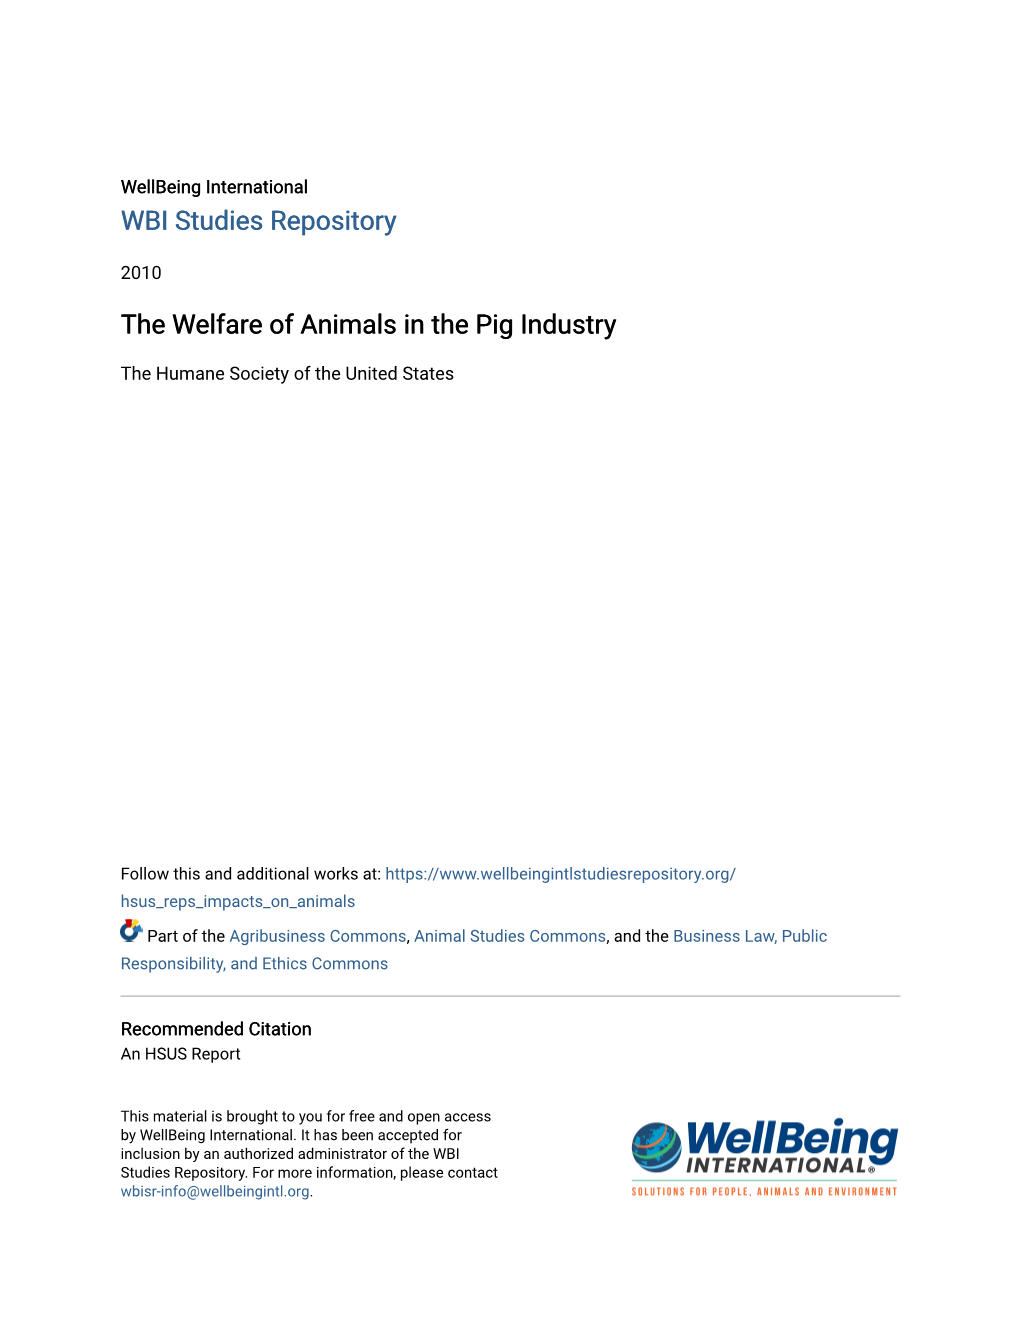 The Welfare of Animals in the Pig Industry